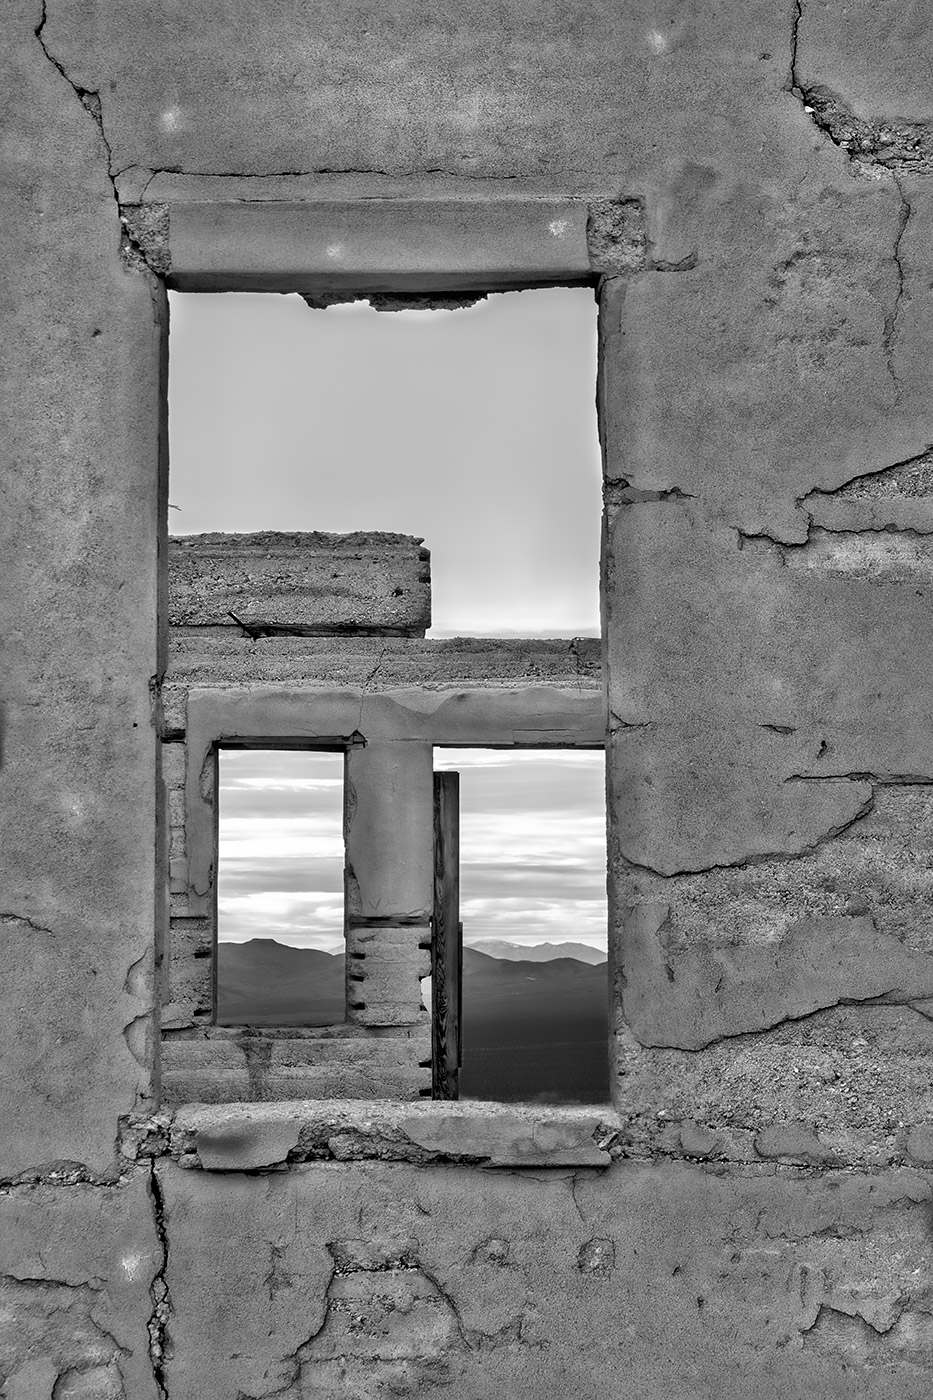 Abandoned building in ghost town outside Death Valley